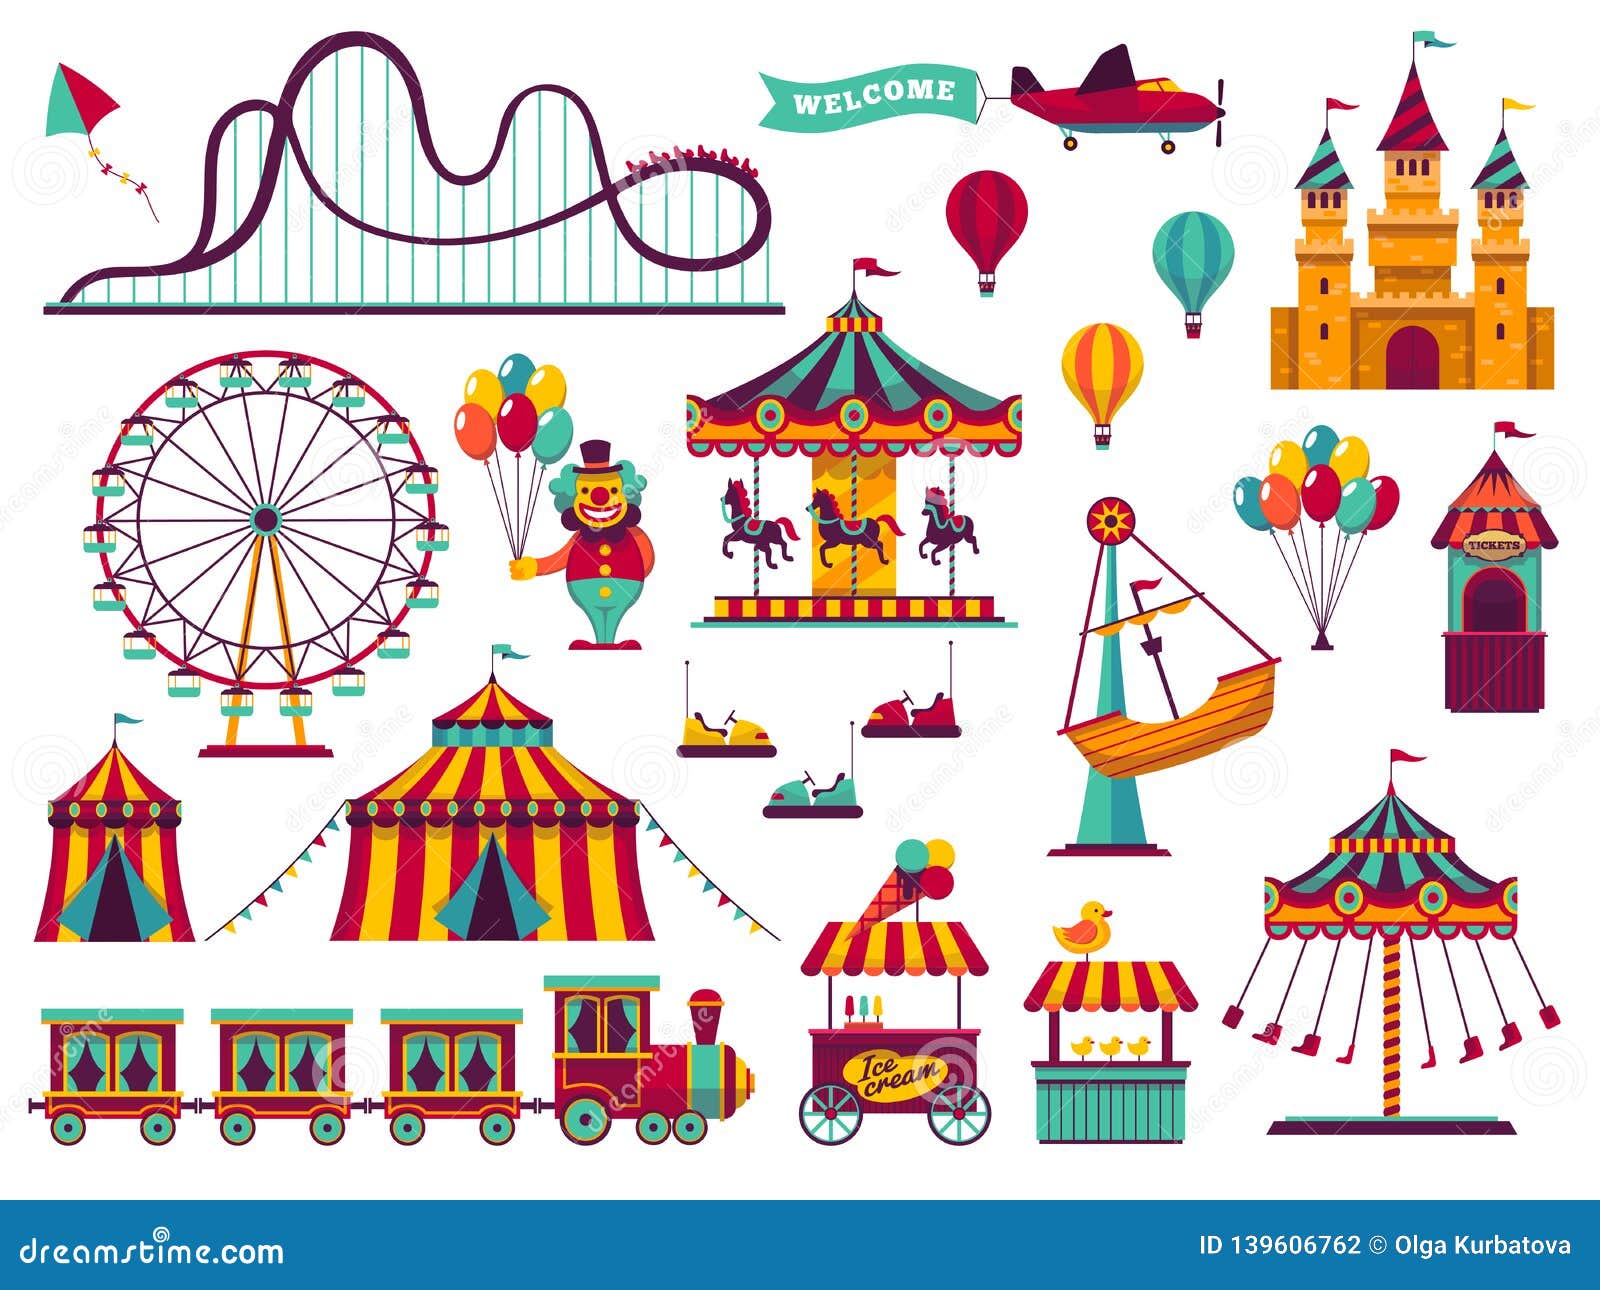 amusement park attractions set. carnival amuse kids carousels games fairground attraction play rollercoaster